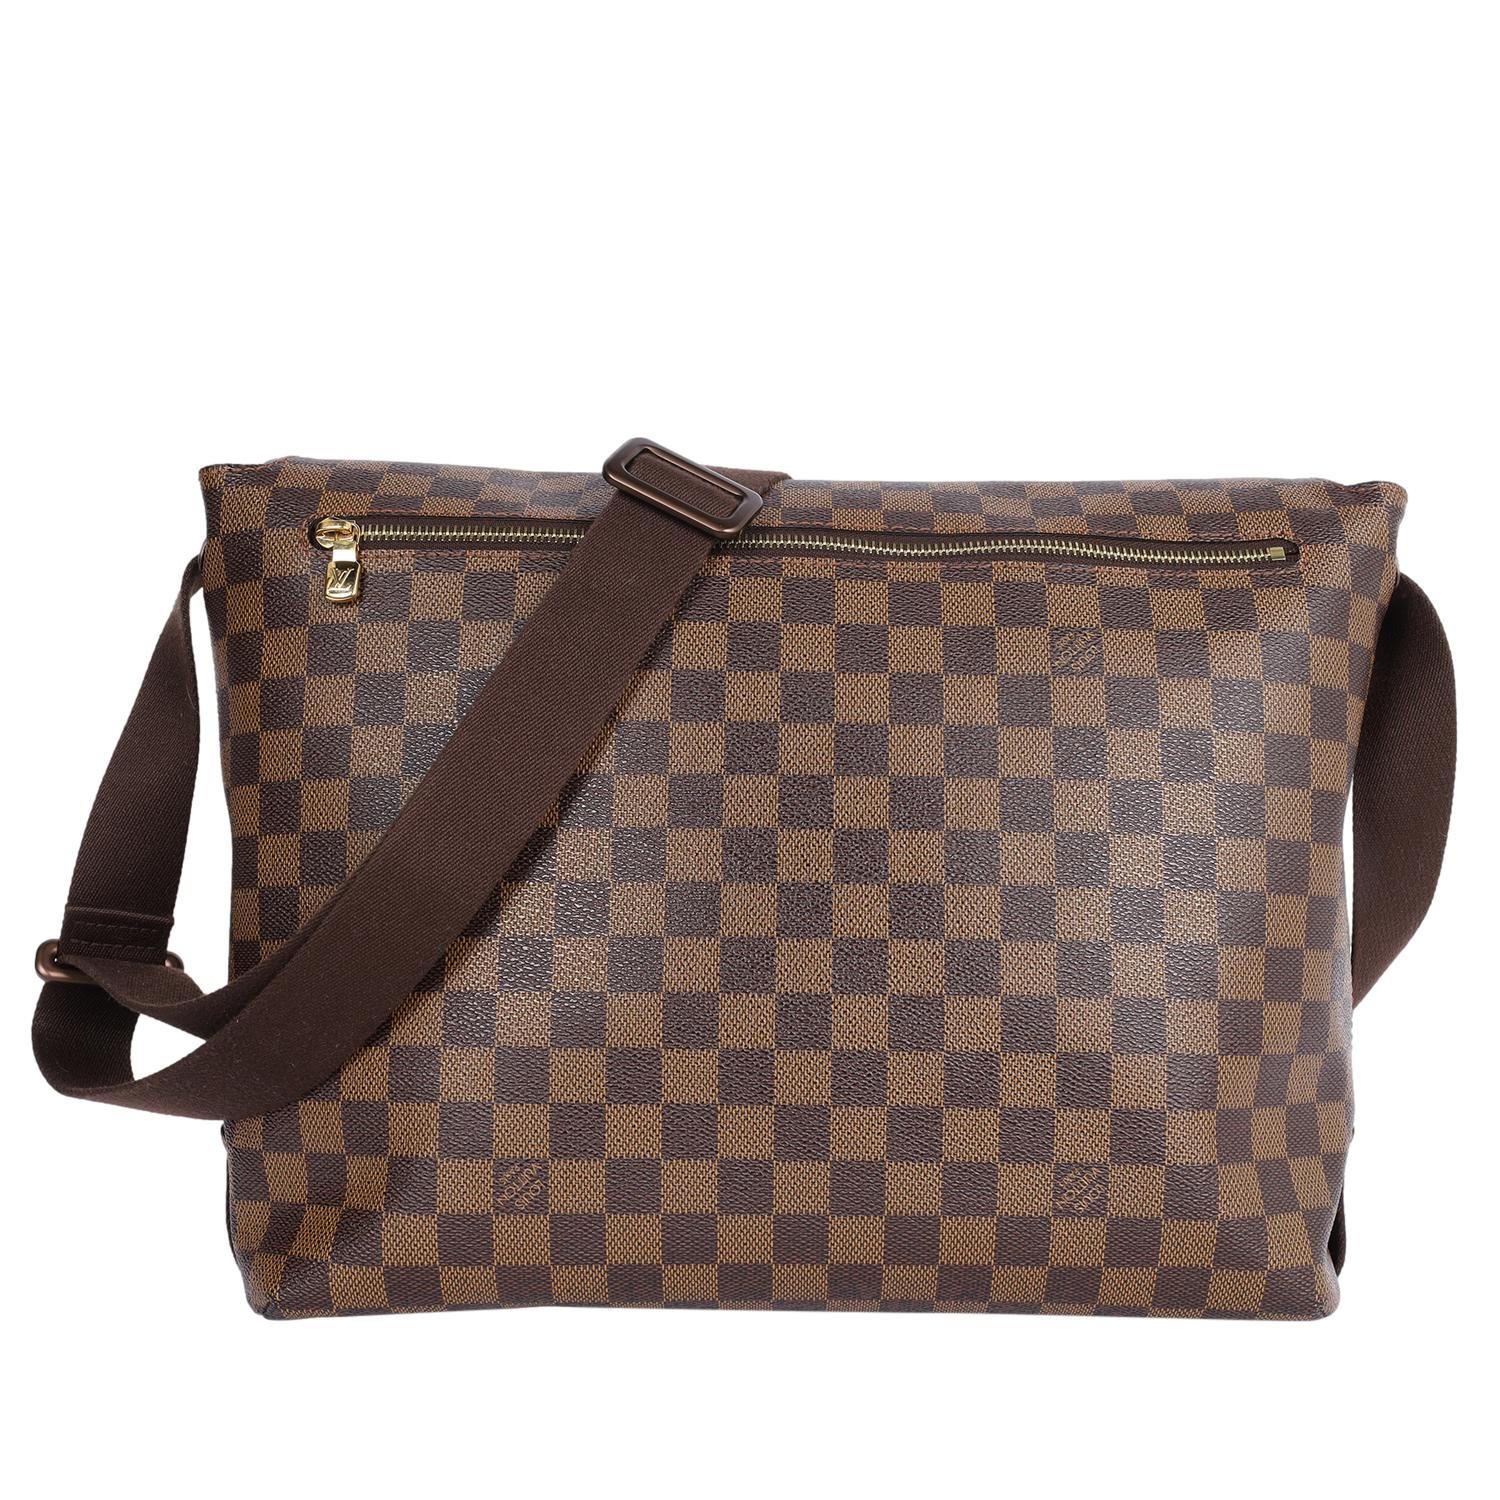 Authentic, pre-loved Louis Vuitton Damier Ebene Brooklyn Gm messenger bag. Features flap front with magnetic closure, zipper pocket under the front flap, large brown textile interior lining with 2 patch pockets, rear zipper pocket, adjustable long